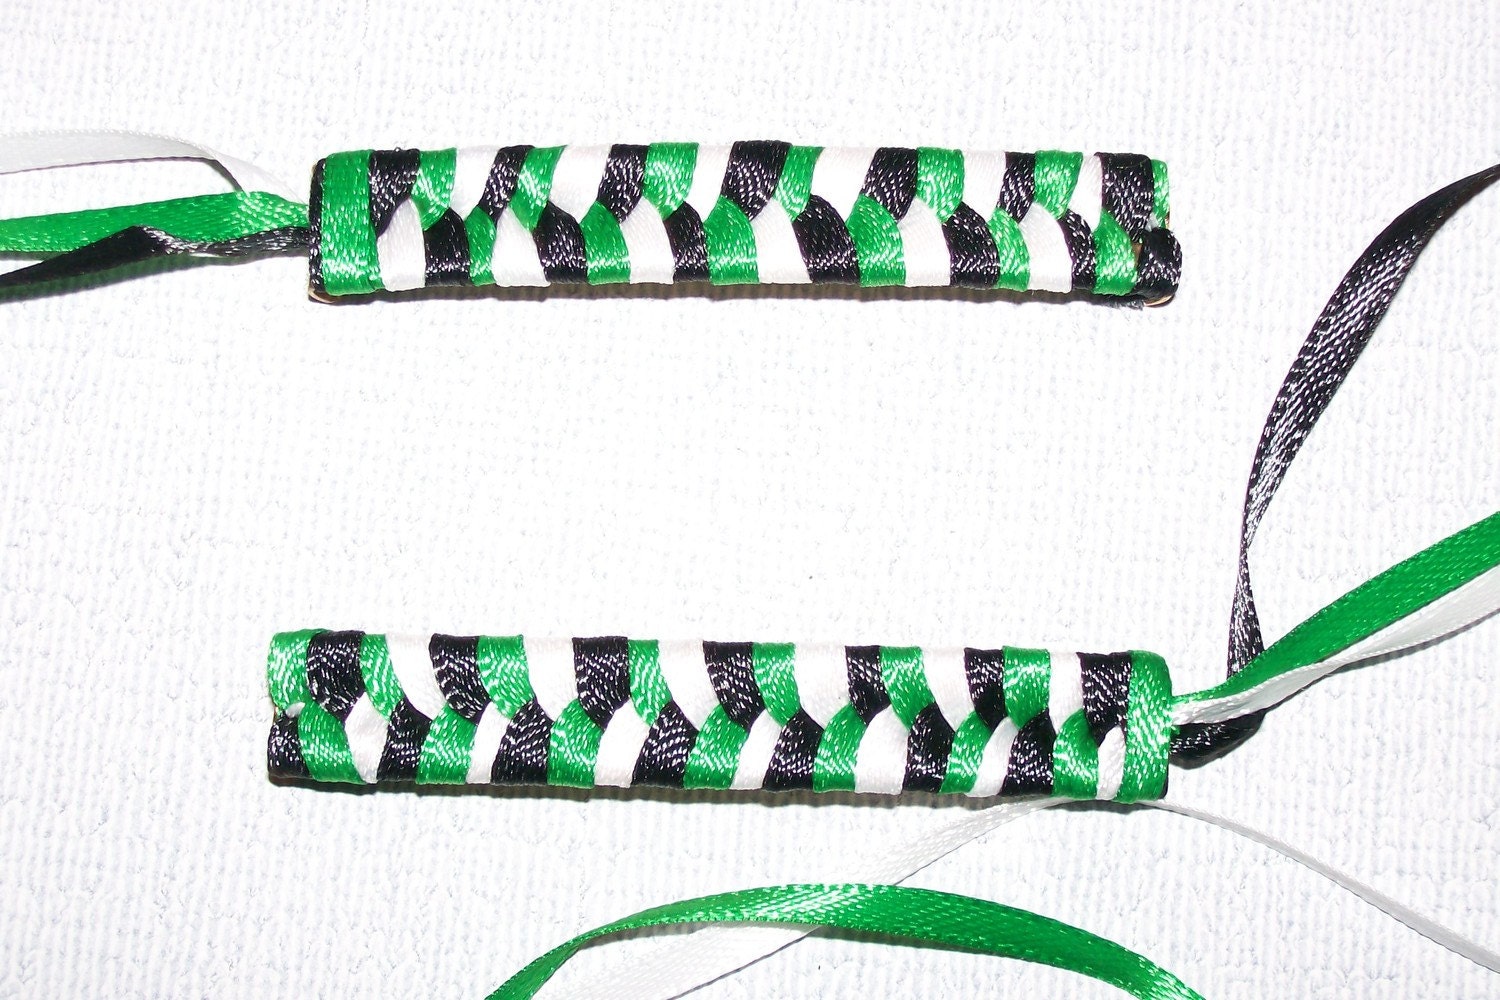 Braided Ribbon Barrettes in Green, Black, and White - WinningWreaths